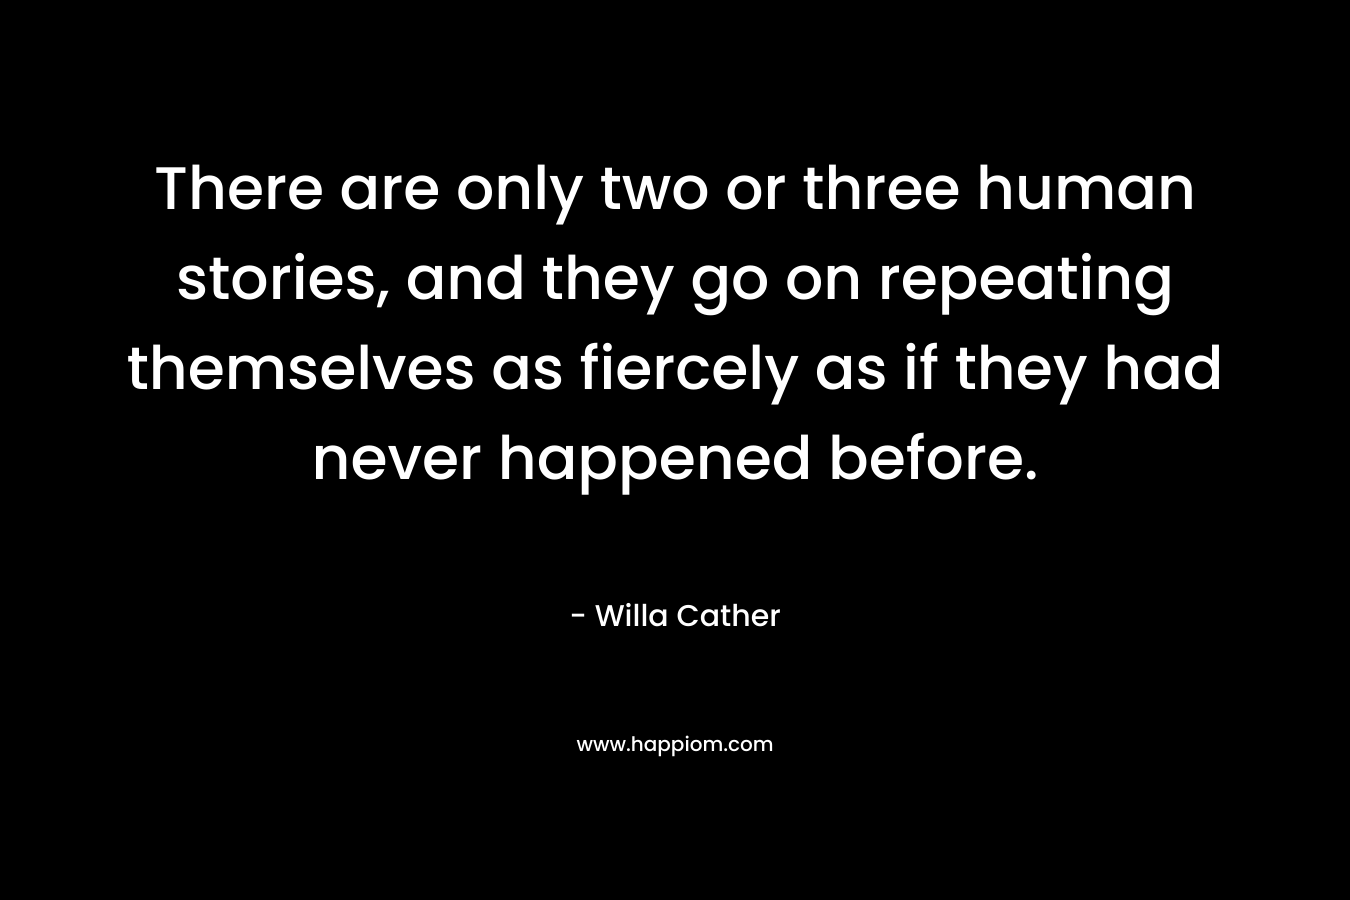 There are only two or three human stories, and they go on repeating themselves as fiercely as if they had never happened before. – Willa Cather